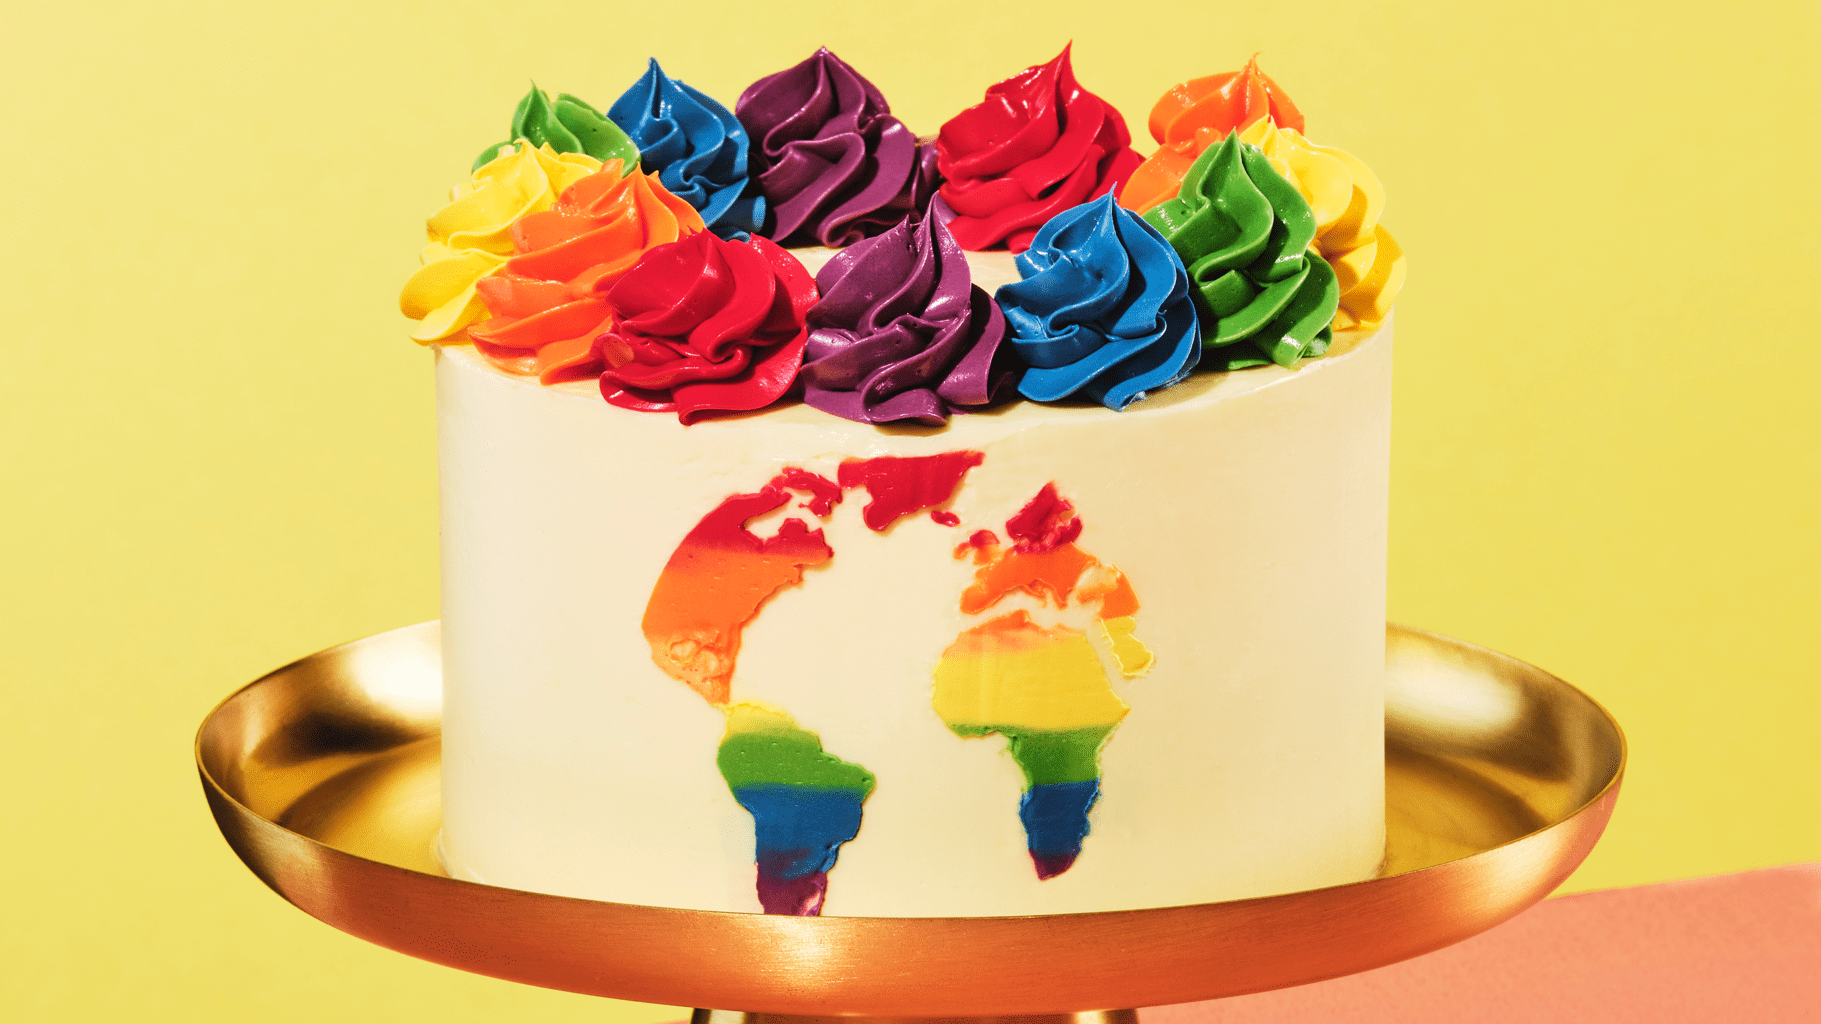 World Pride Cake recipe from Baking with Pride by Janusz Domagala.